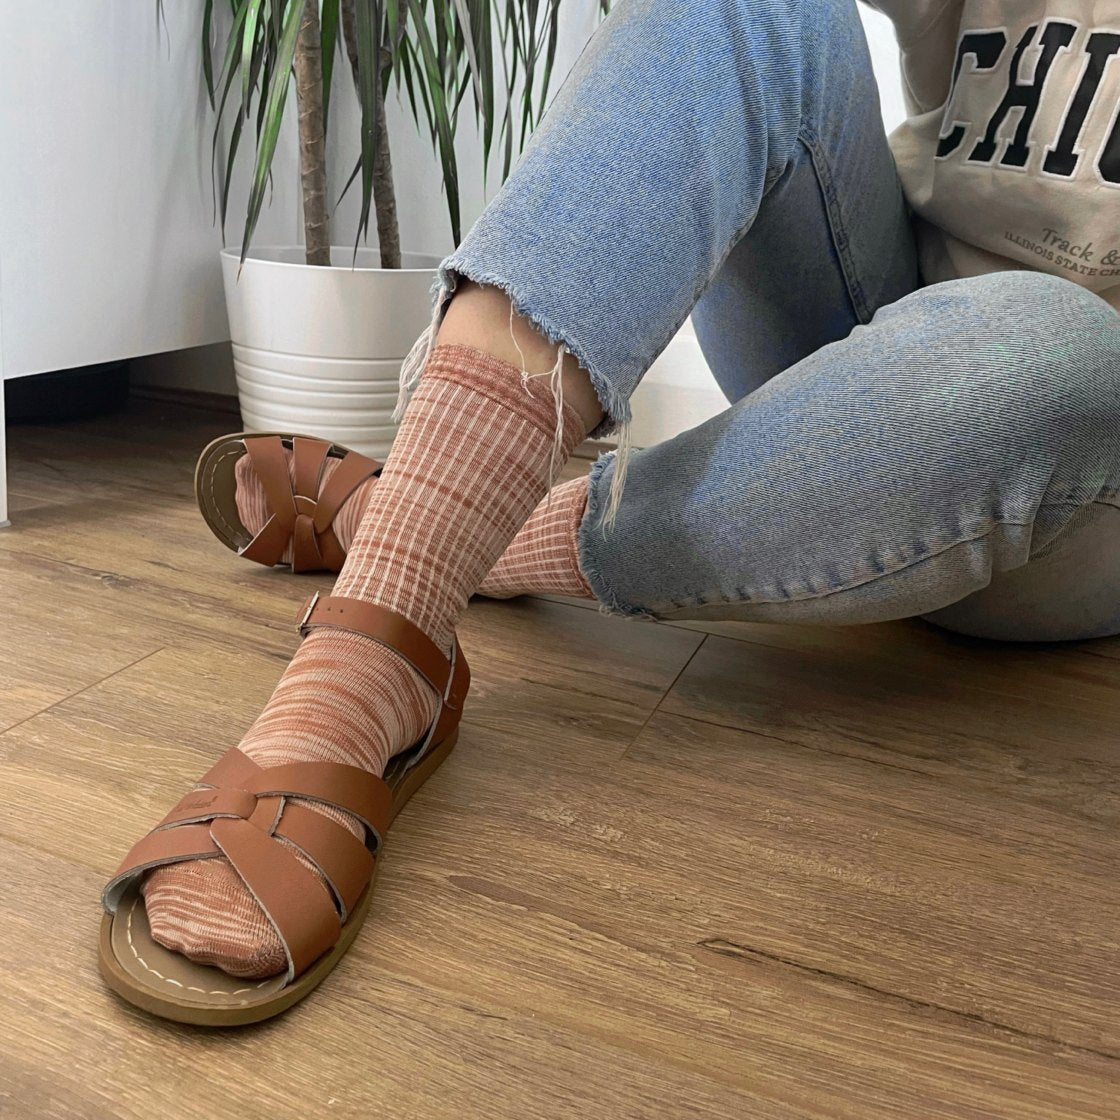 Wearing Socks With Sandals: The Definitive Styling Guide